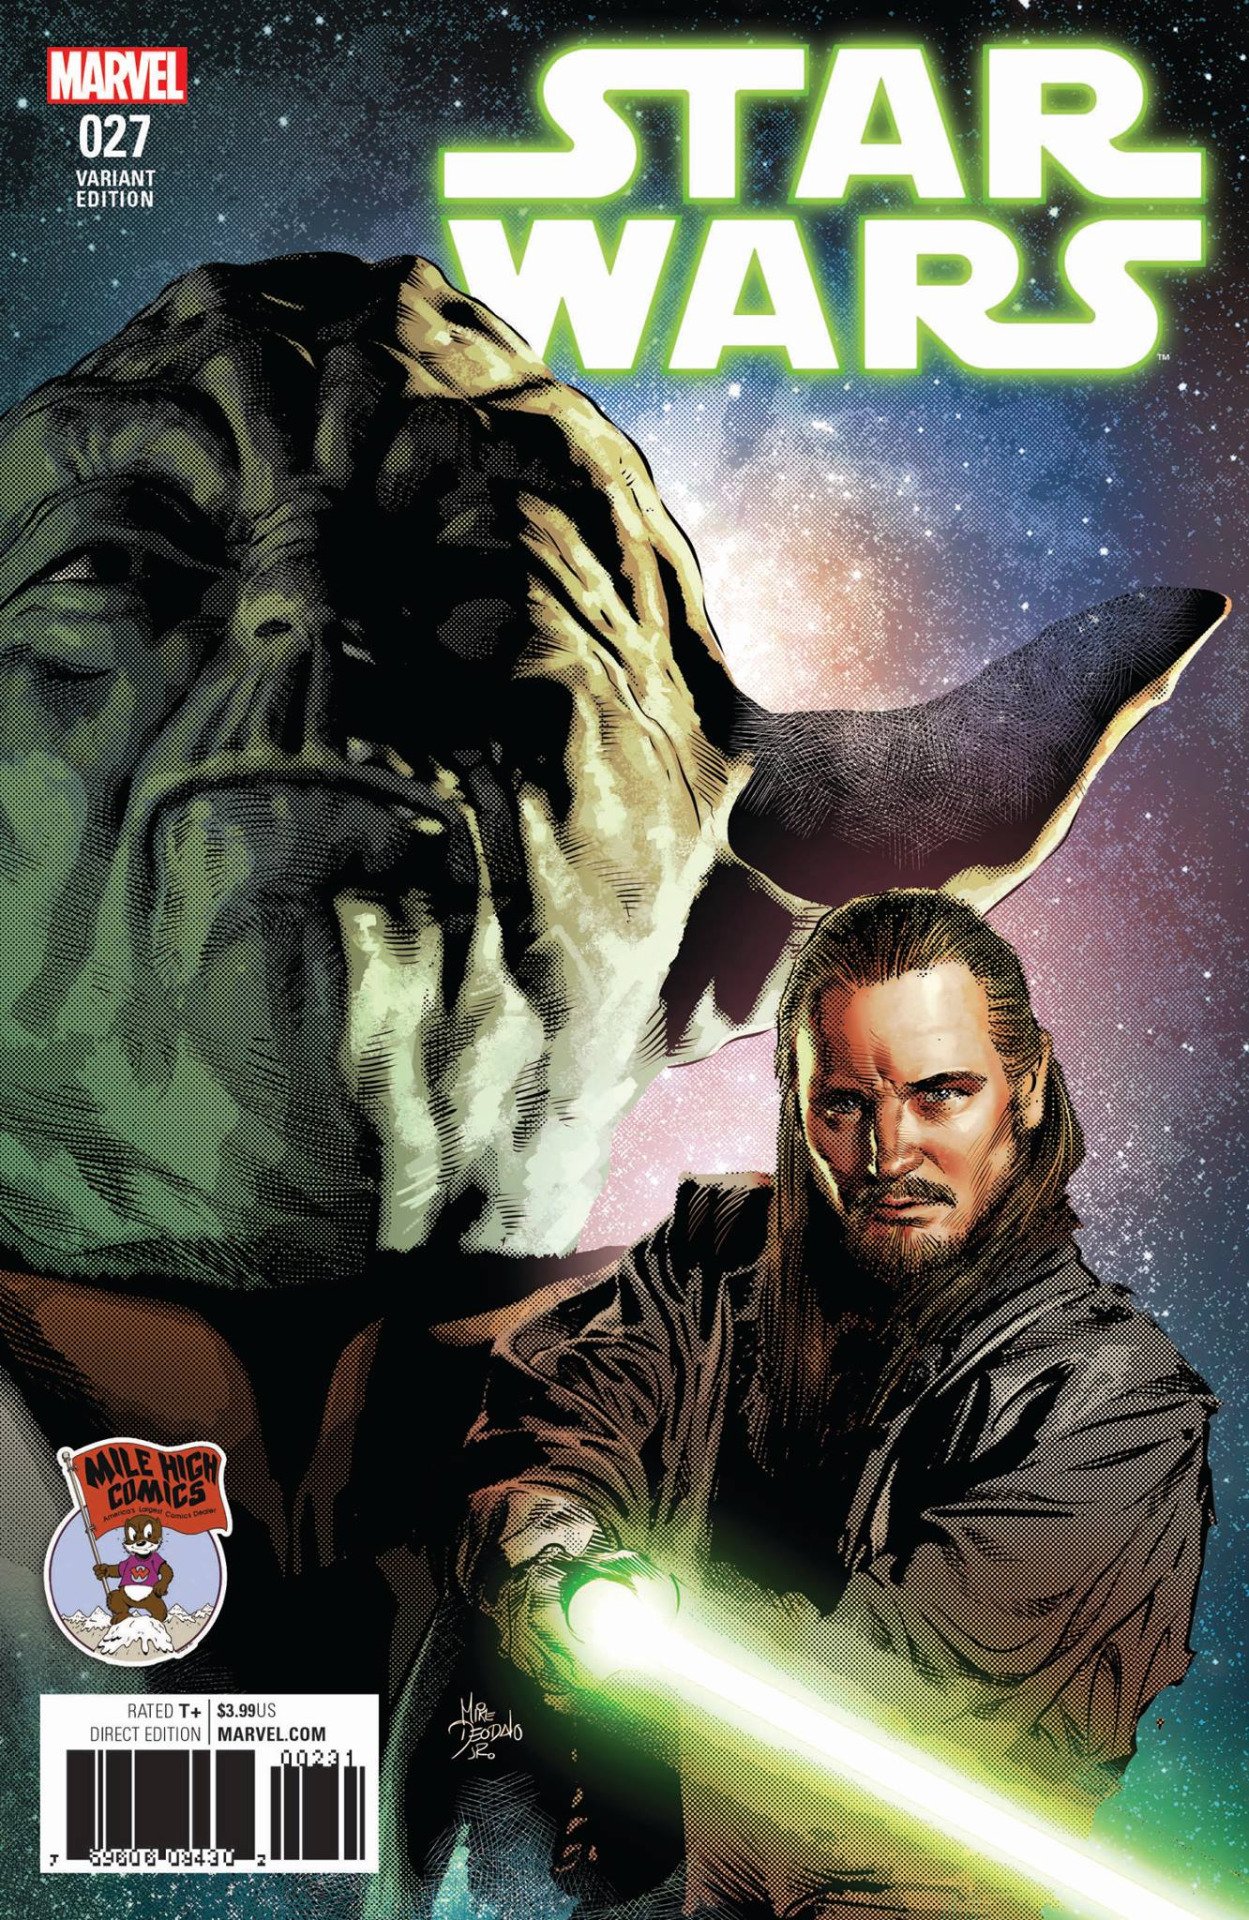 Star Wars #27 (Mike Deodato Mile High Comics Variant Cover) (25.01.2017)